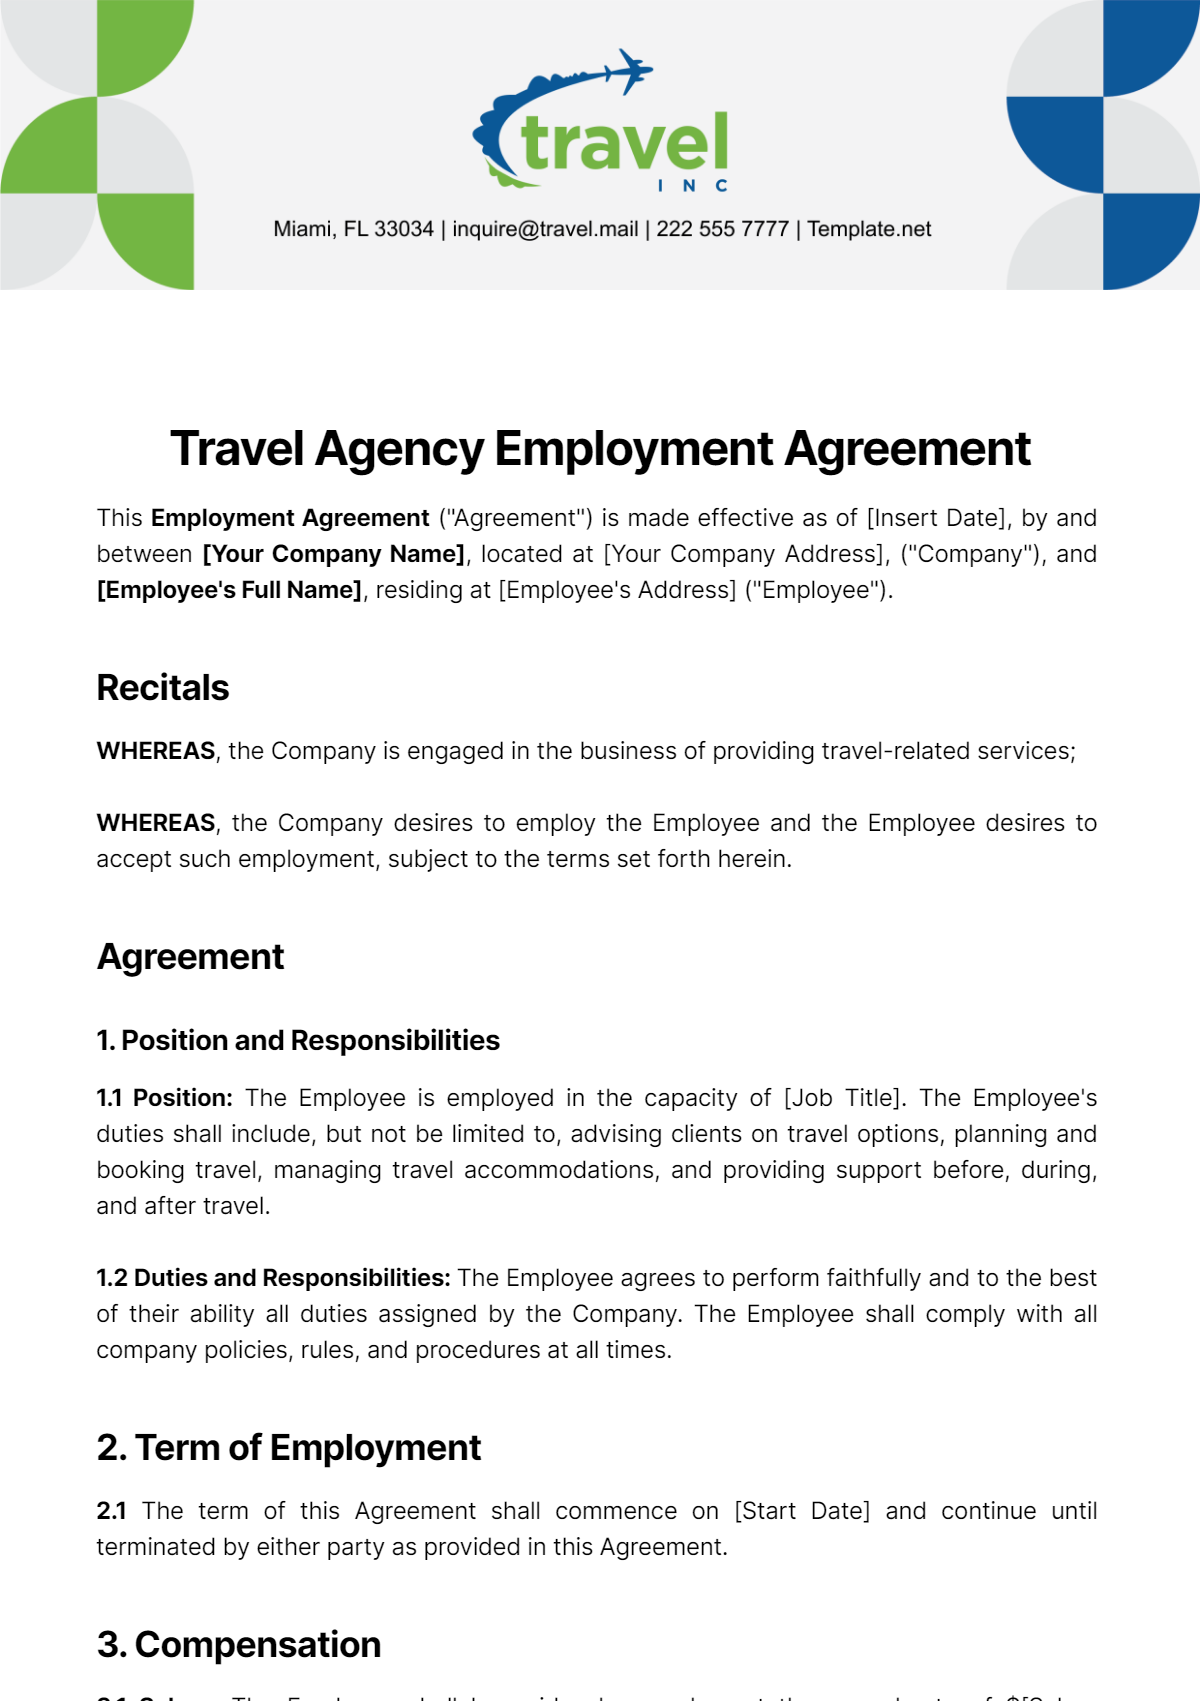 Travel Agency Employment Agreement Template